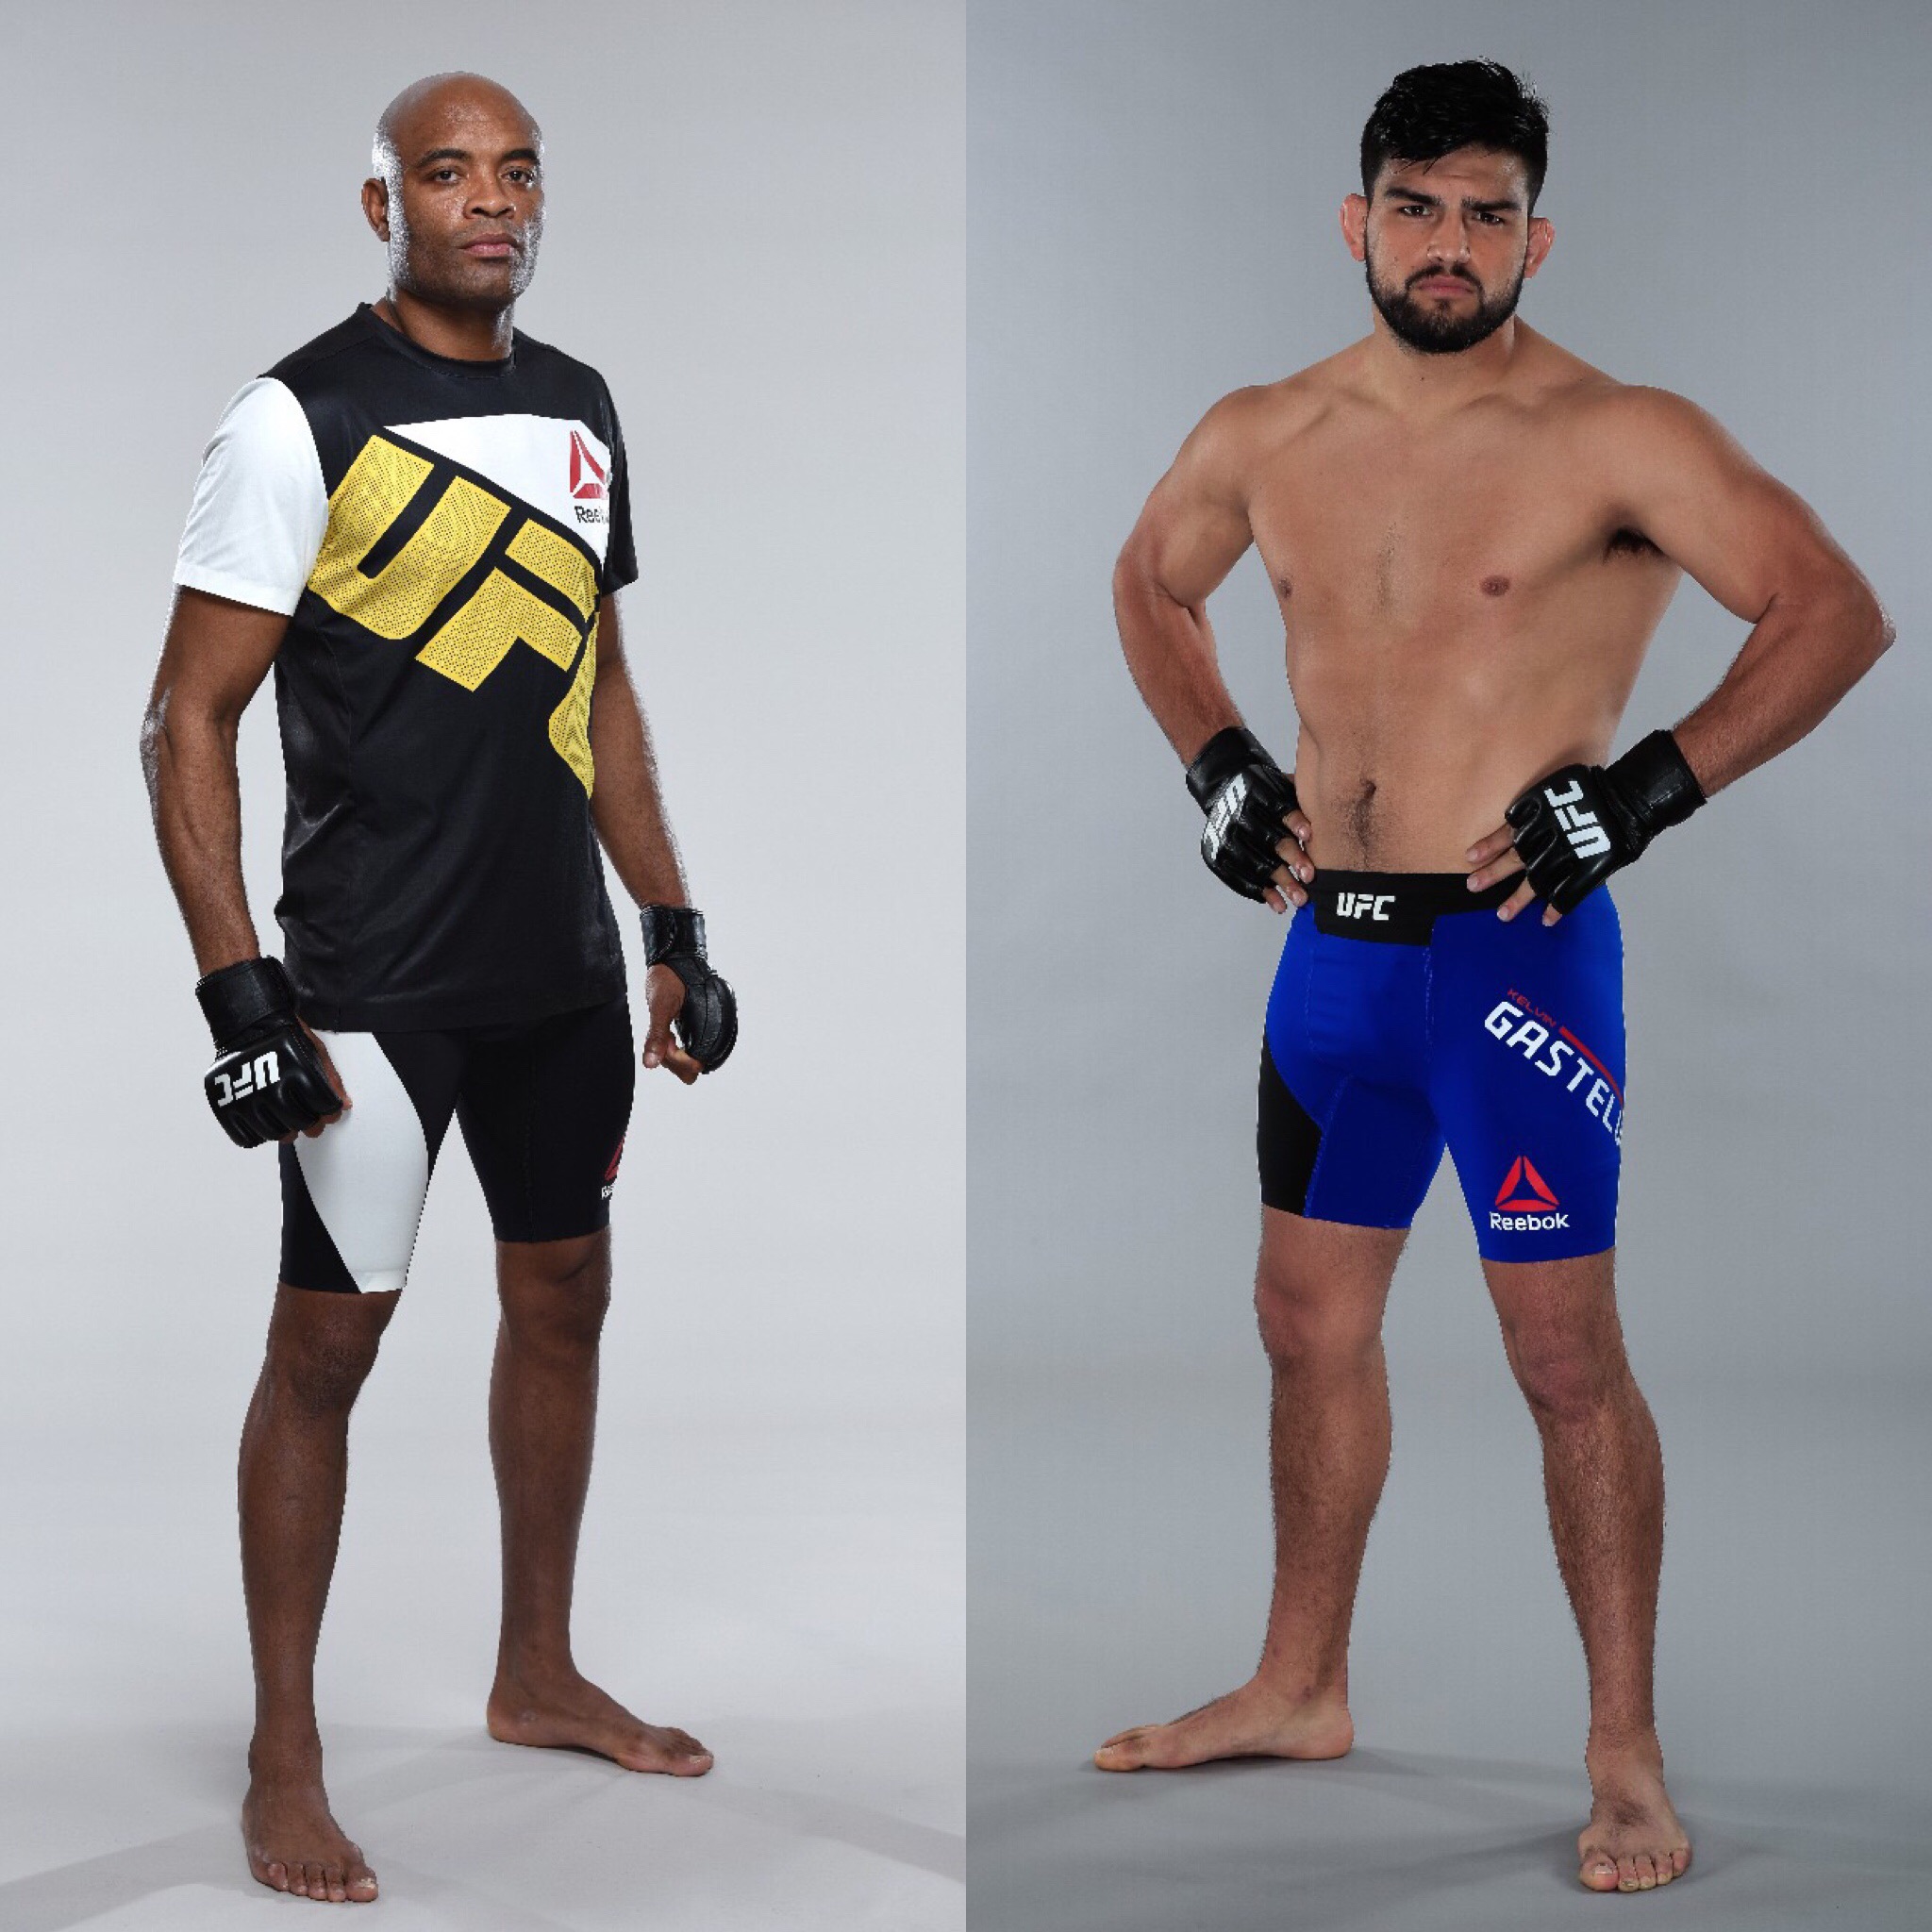 Anderson Silva and <a href='../fighter/Kelvin-Gastelum'>Kelvin Gastelum</a> will meet in the Octagon on Saturday, Nov. 25 live on UFC FIGHT PASS“ align=“right“/><p><strong>UFC Fight Night: Silva vs. Gastelum</strong></p><p><strong><a href=